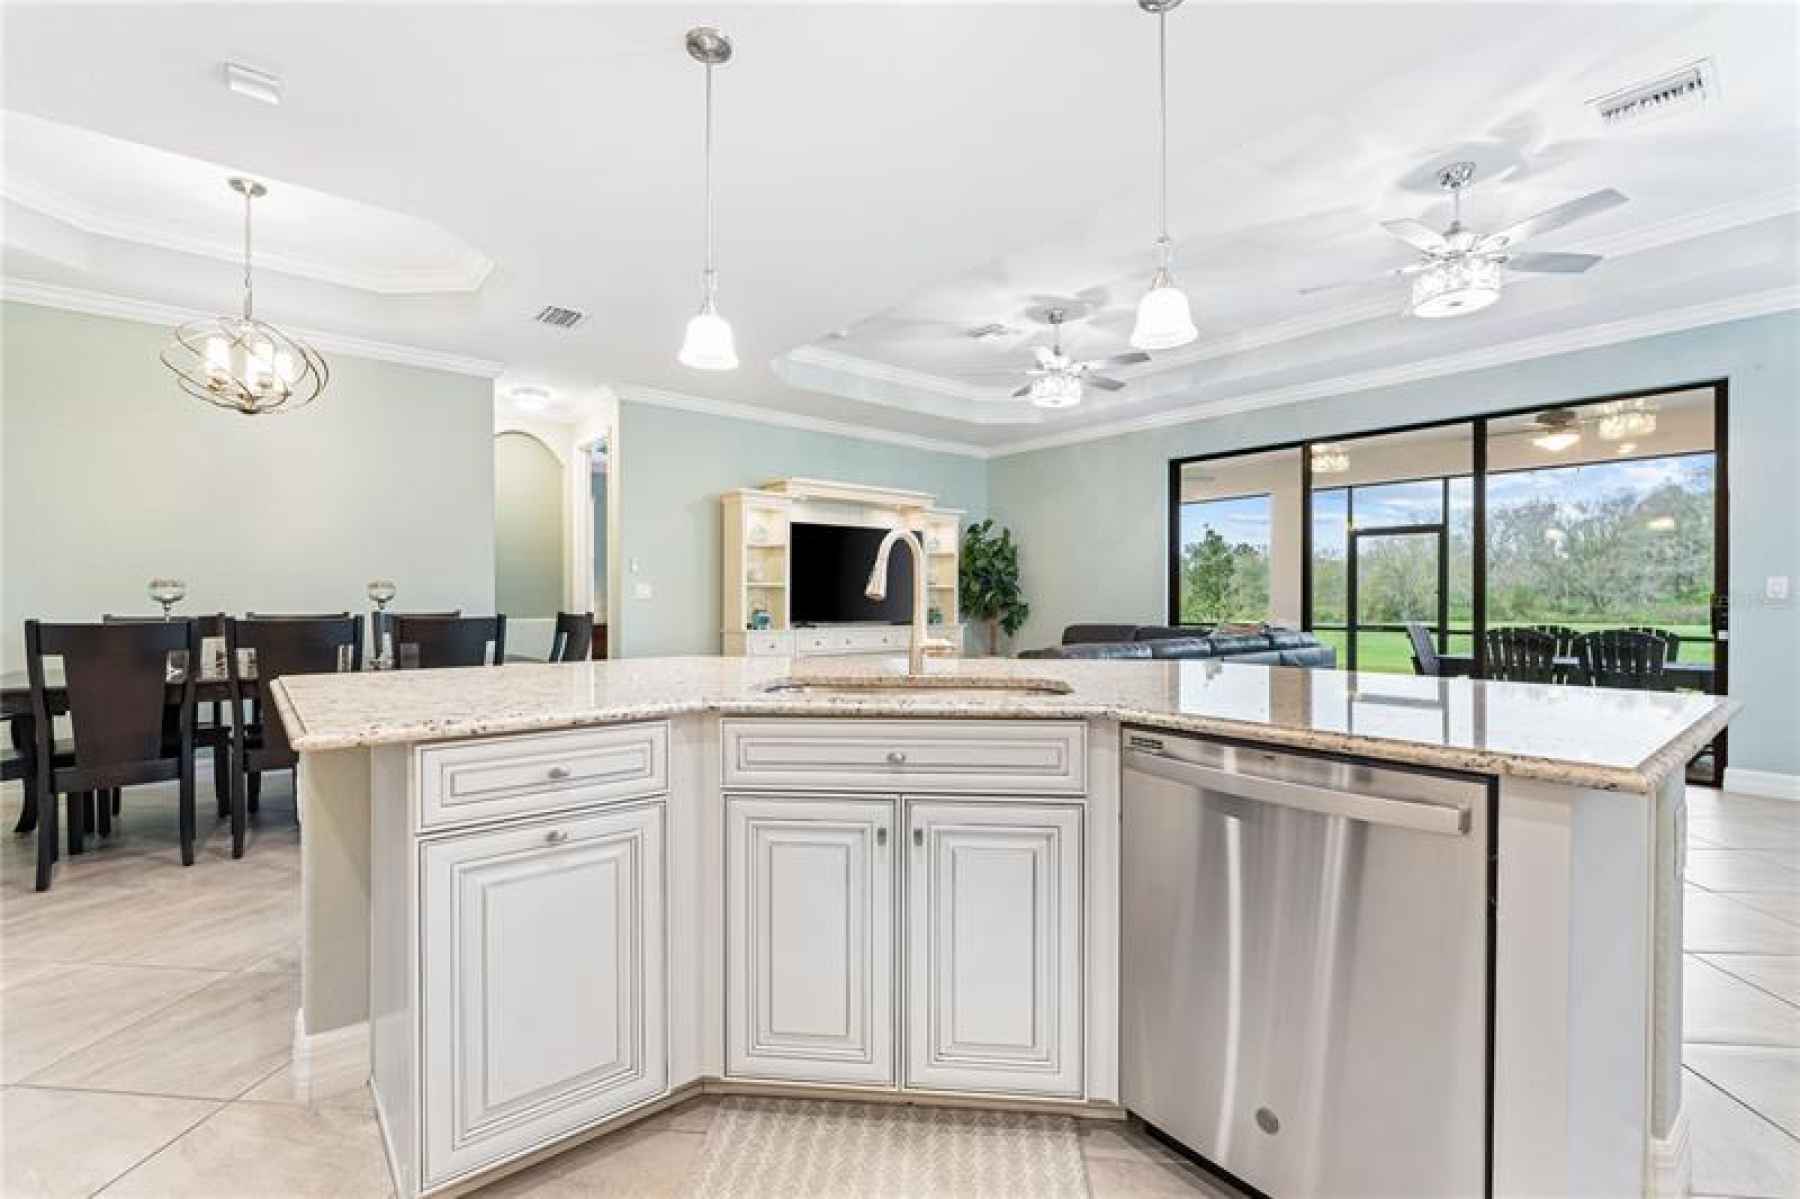 Kitchen overlooking family and dining area.